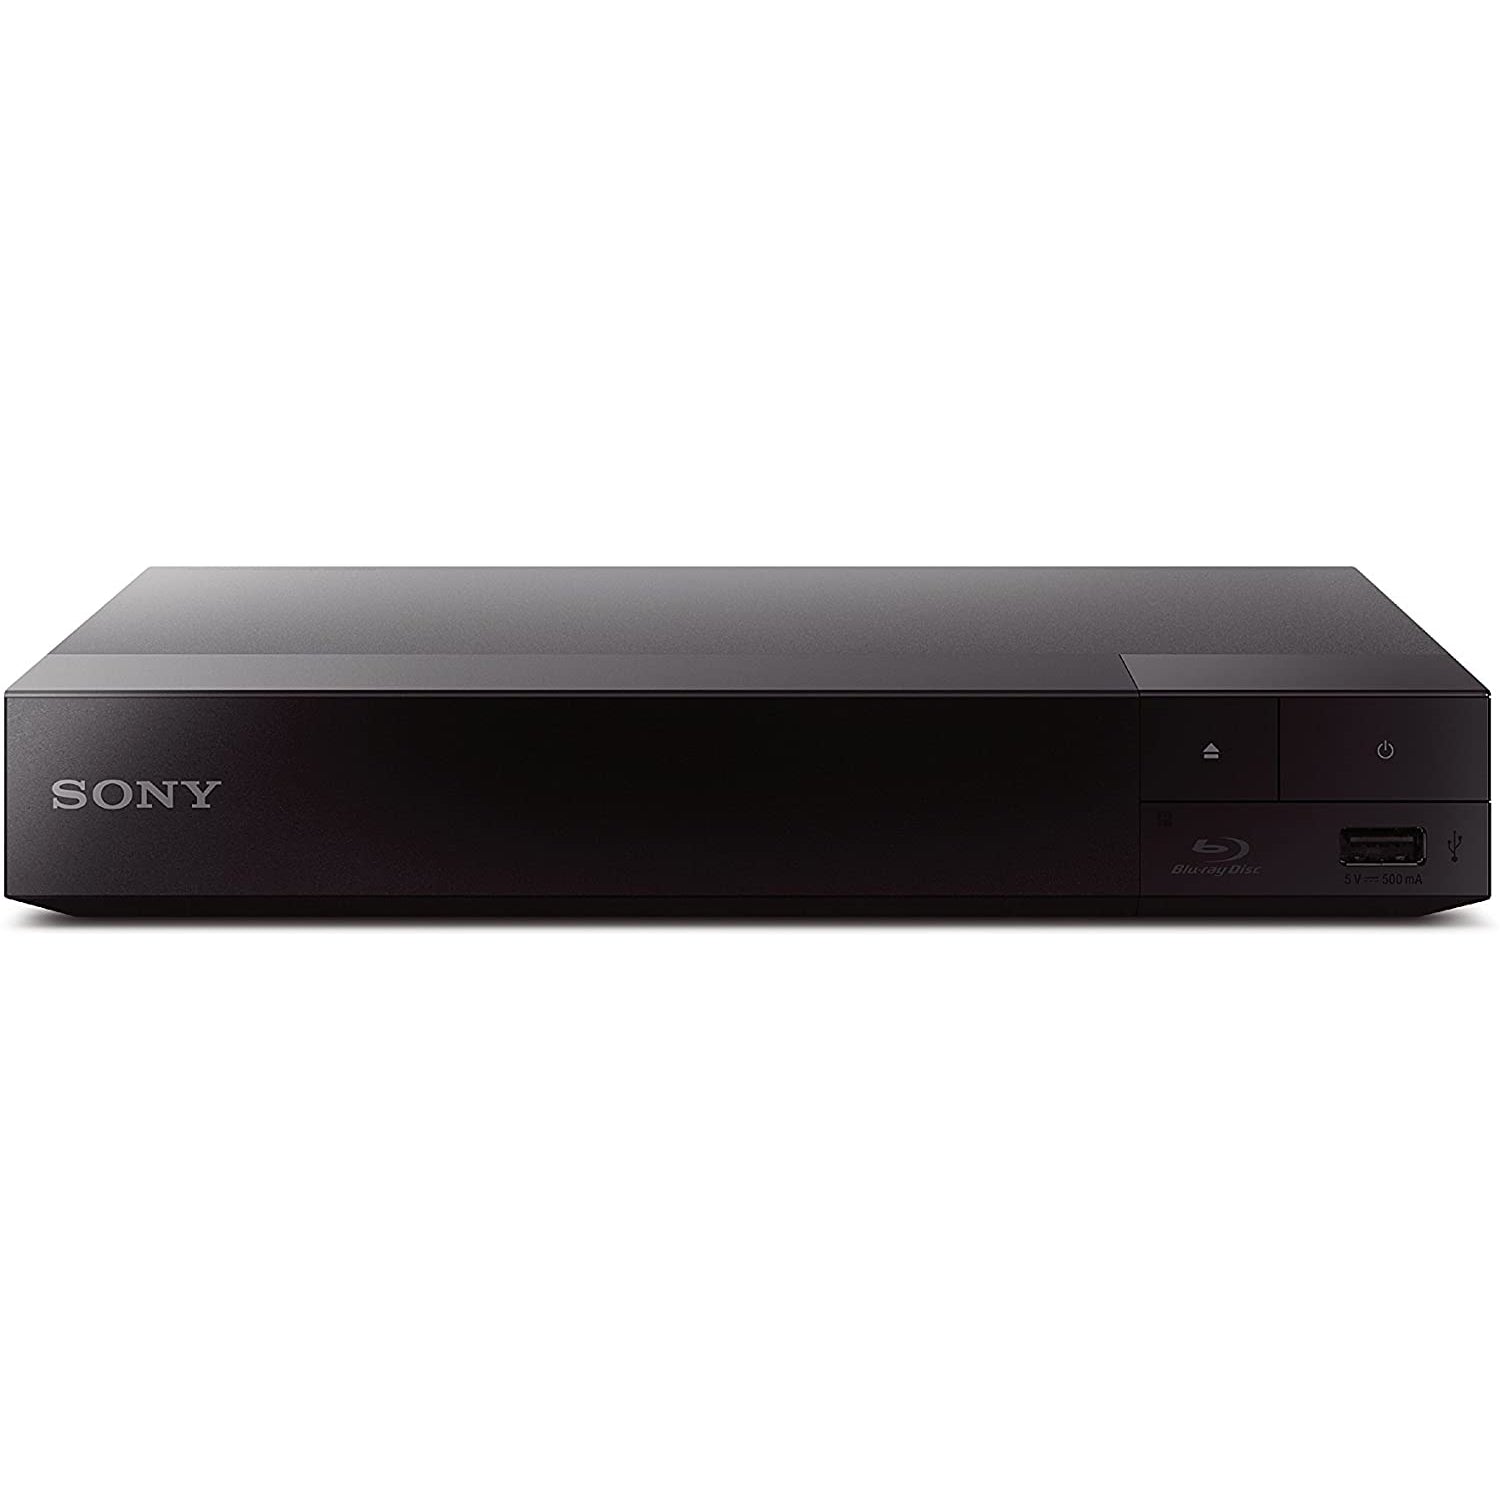 Sony BDP-S3700 Smart Blu-Ray/DVD Player - Refurbished Excellent